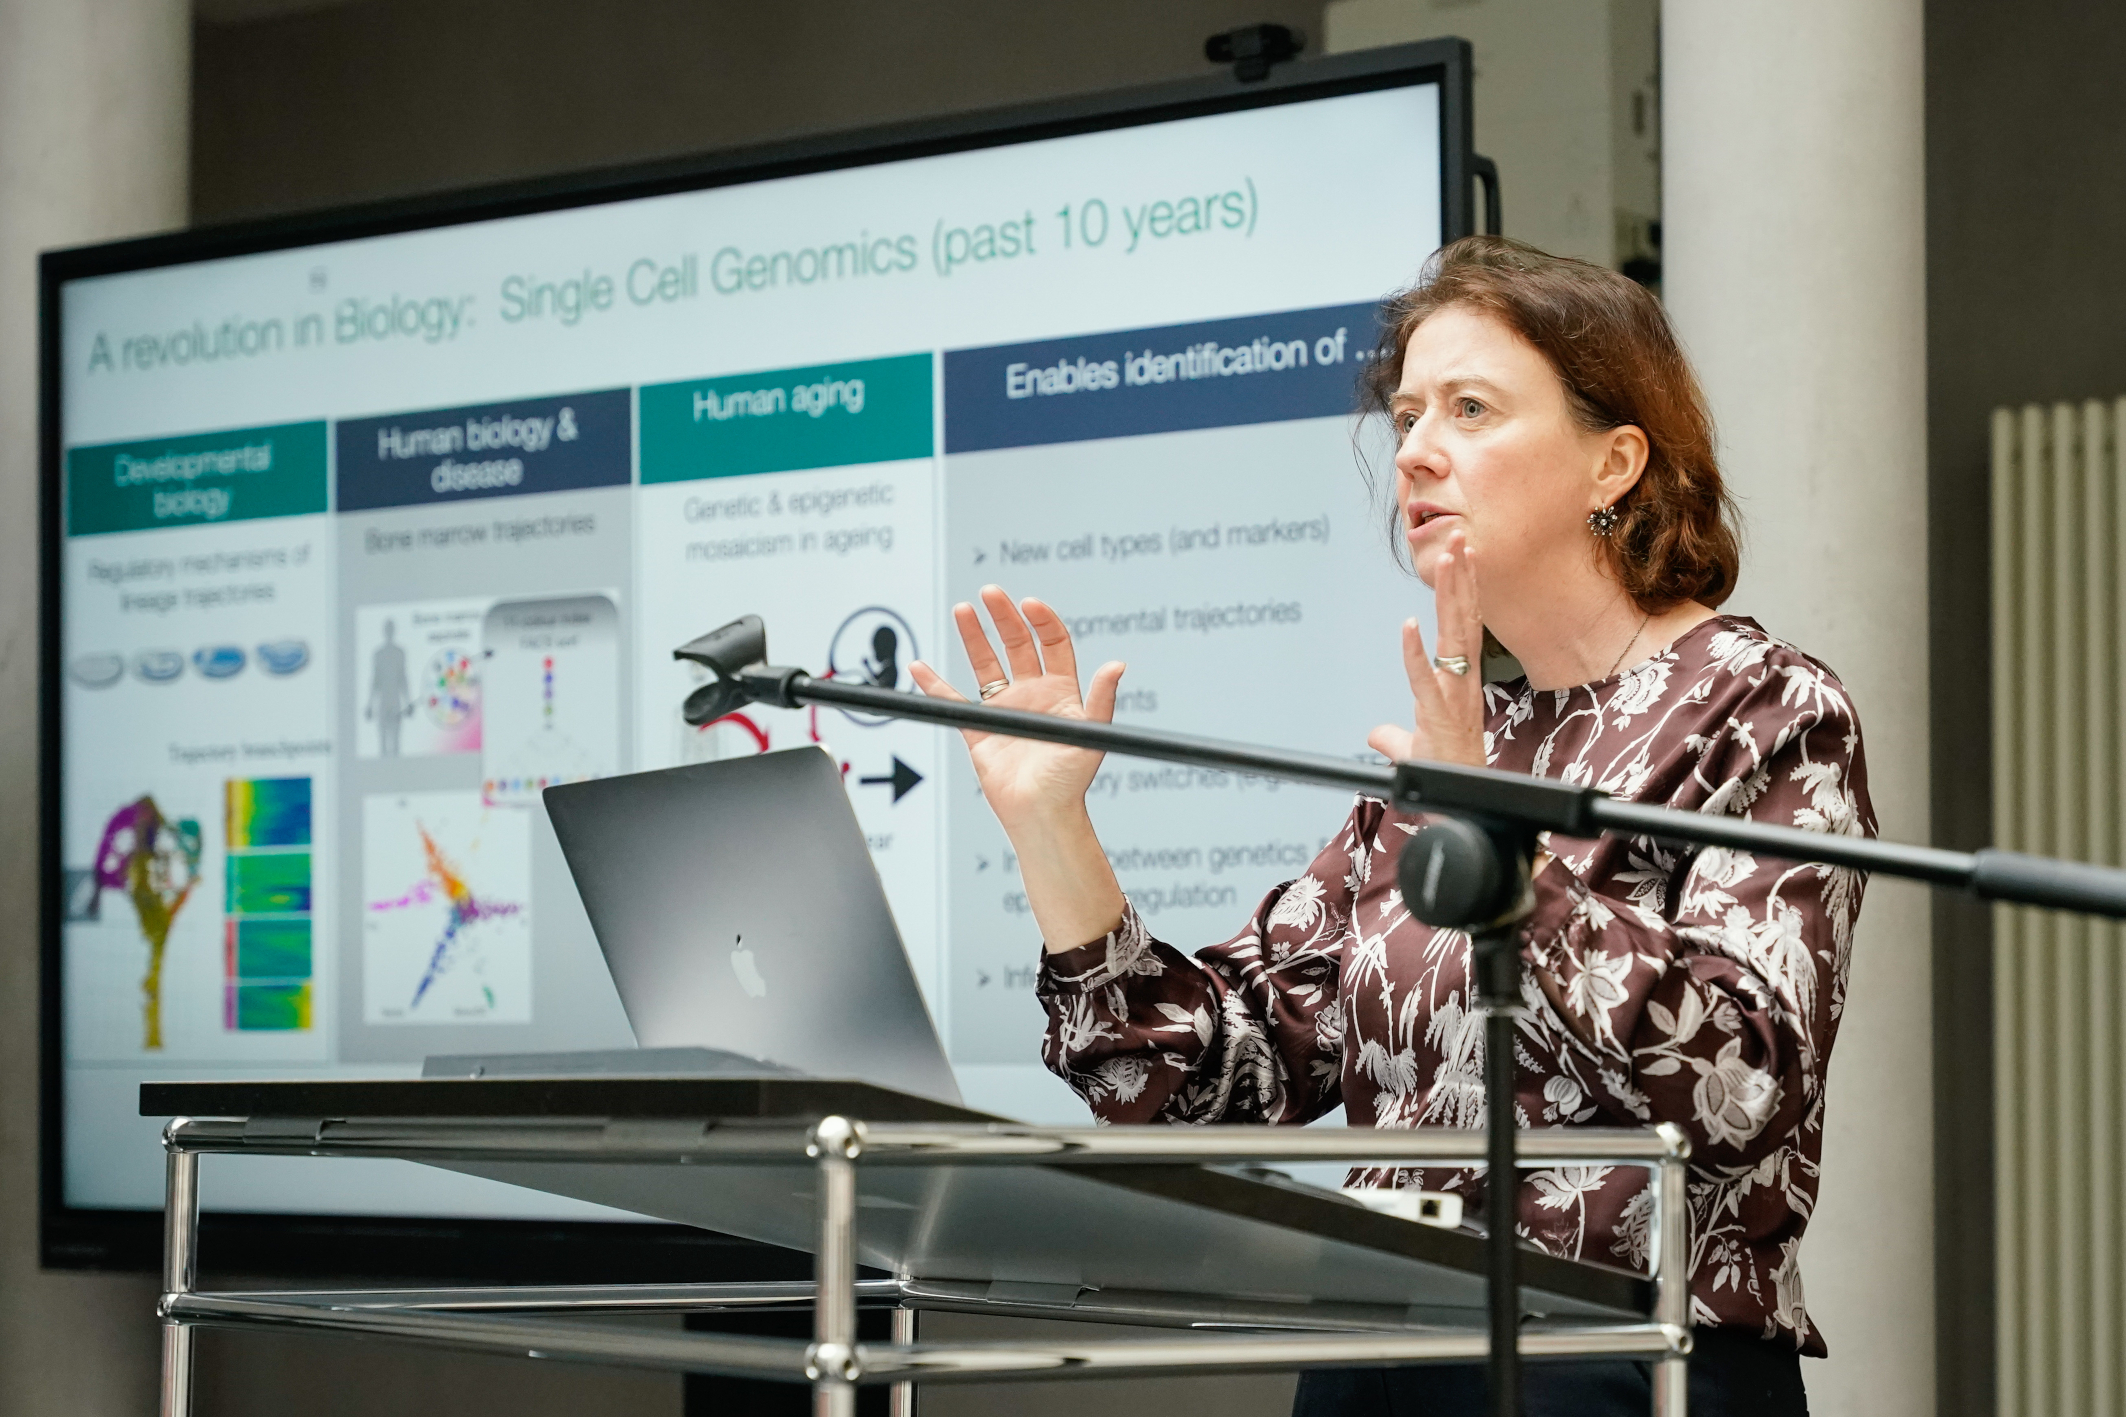 The keynote lecture on “Rewriting Life’s Code: The Convergence of Genome Regulation and Synthetic Genomics” was delivered by Eileen Furlong, Head of the Genome Biology Unit at the European Molecular Biology Laboratory in Heidelberg.